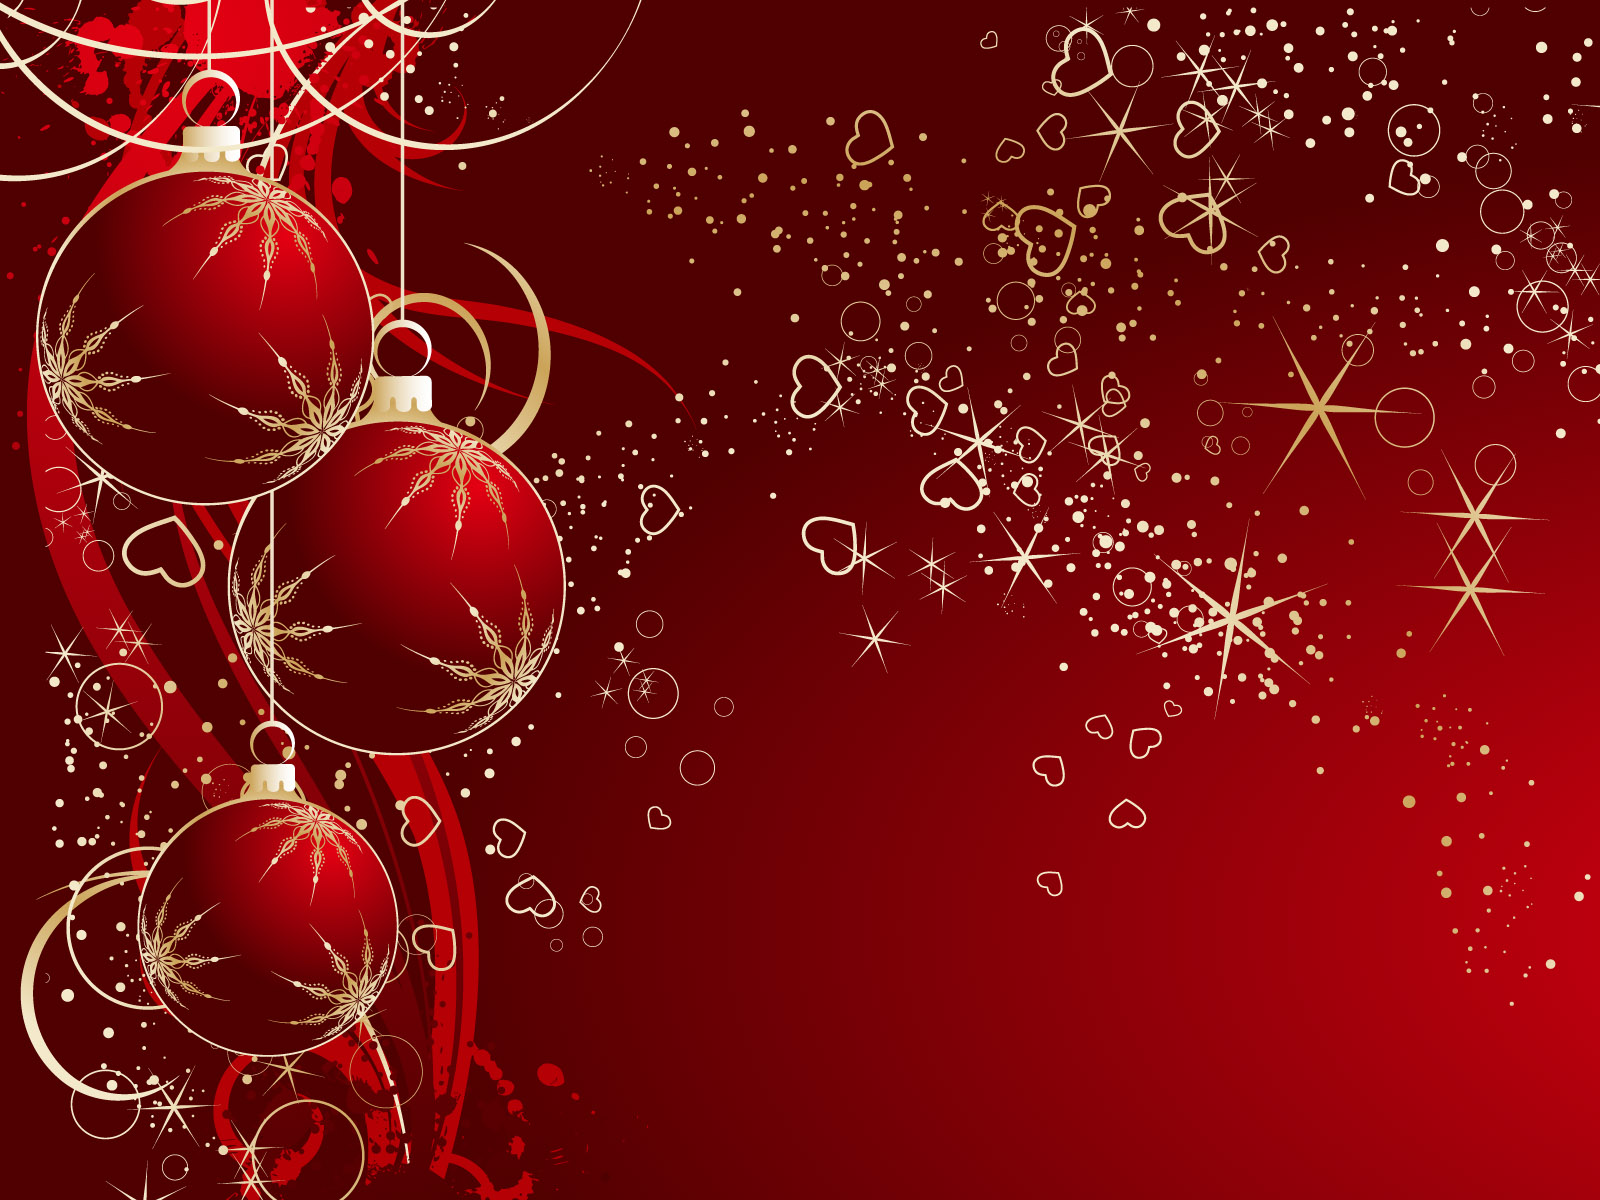 Abstract Red and White Christmas Hd Download